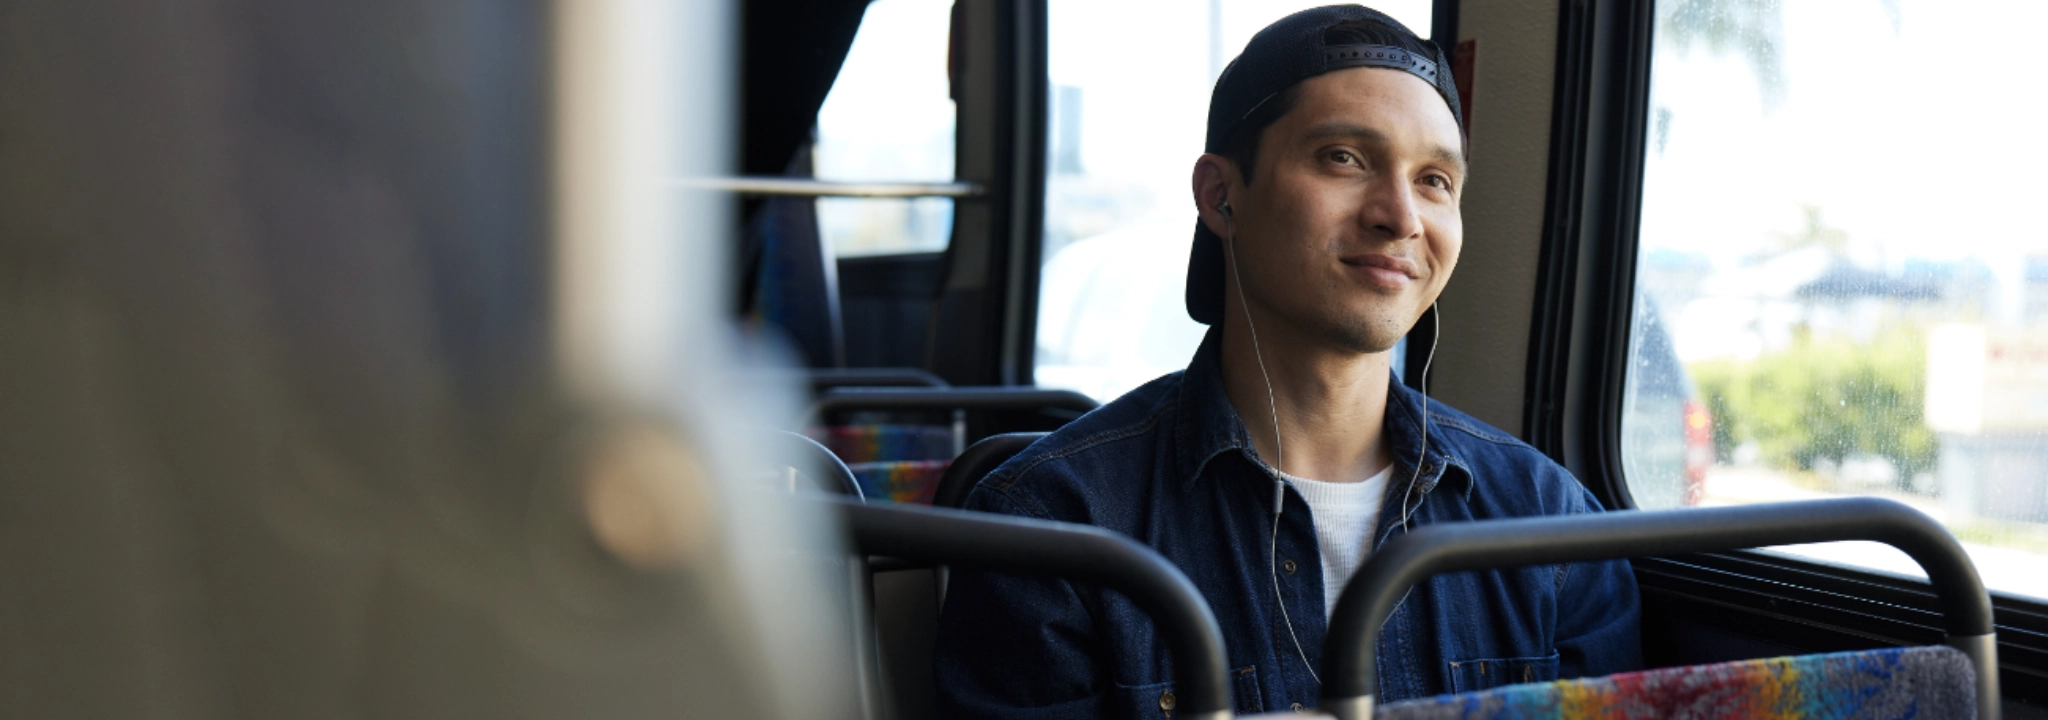 Medium distance shot of a man sitting on a bus listening to music and smiling